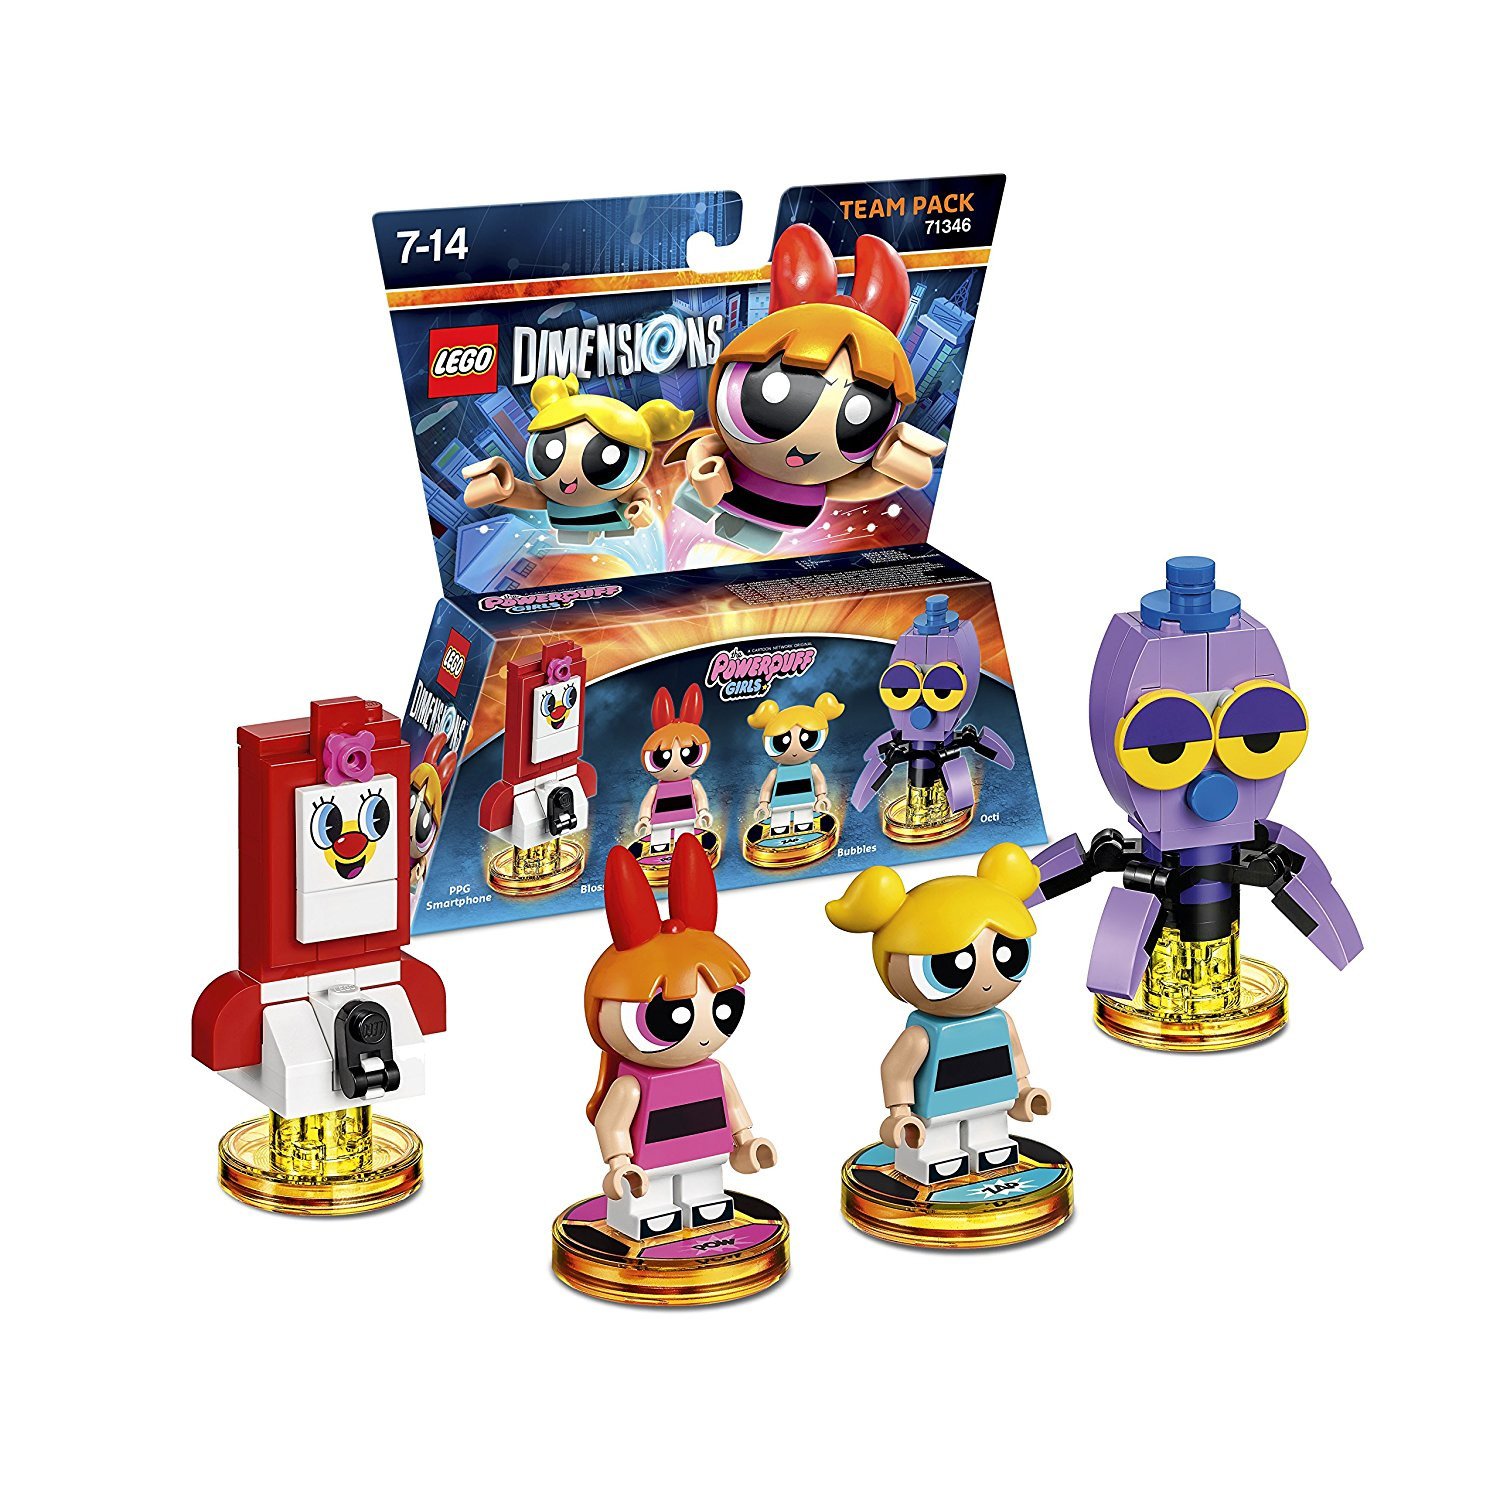 LEGO Dimensions - Team Pack (71346) - The Puff Power Girls (Blossom, Bubbles, Octi, PPG Smartphone)